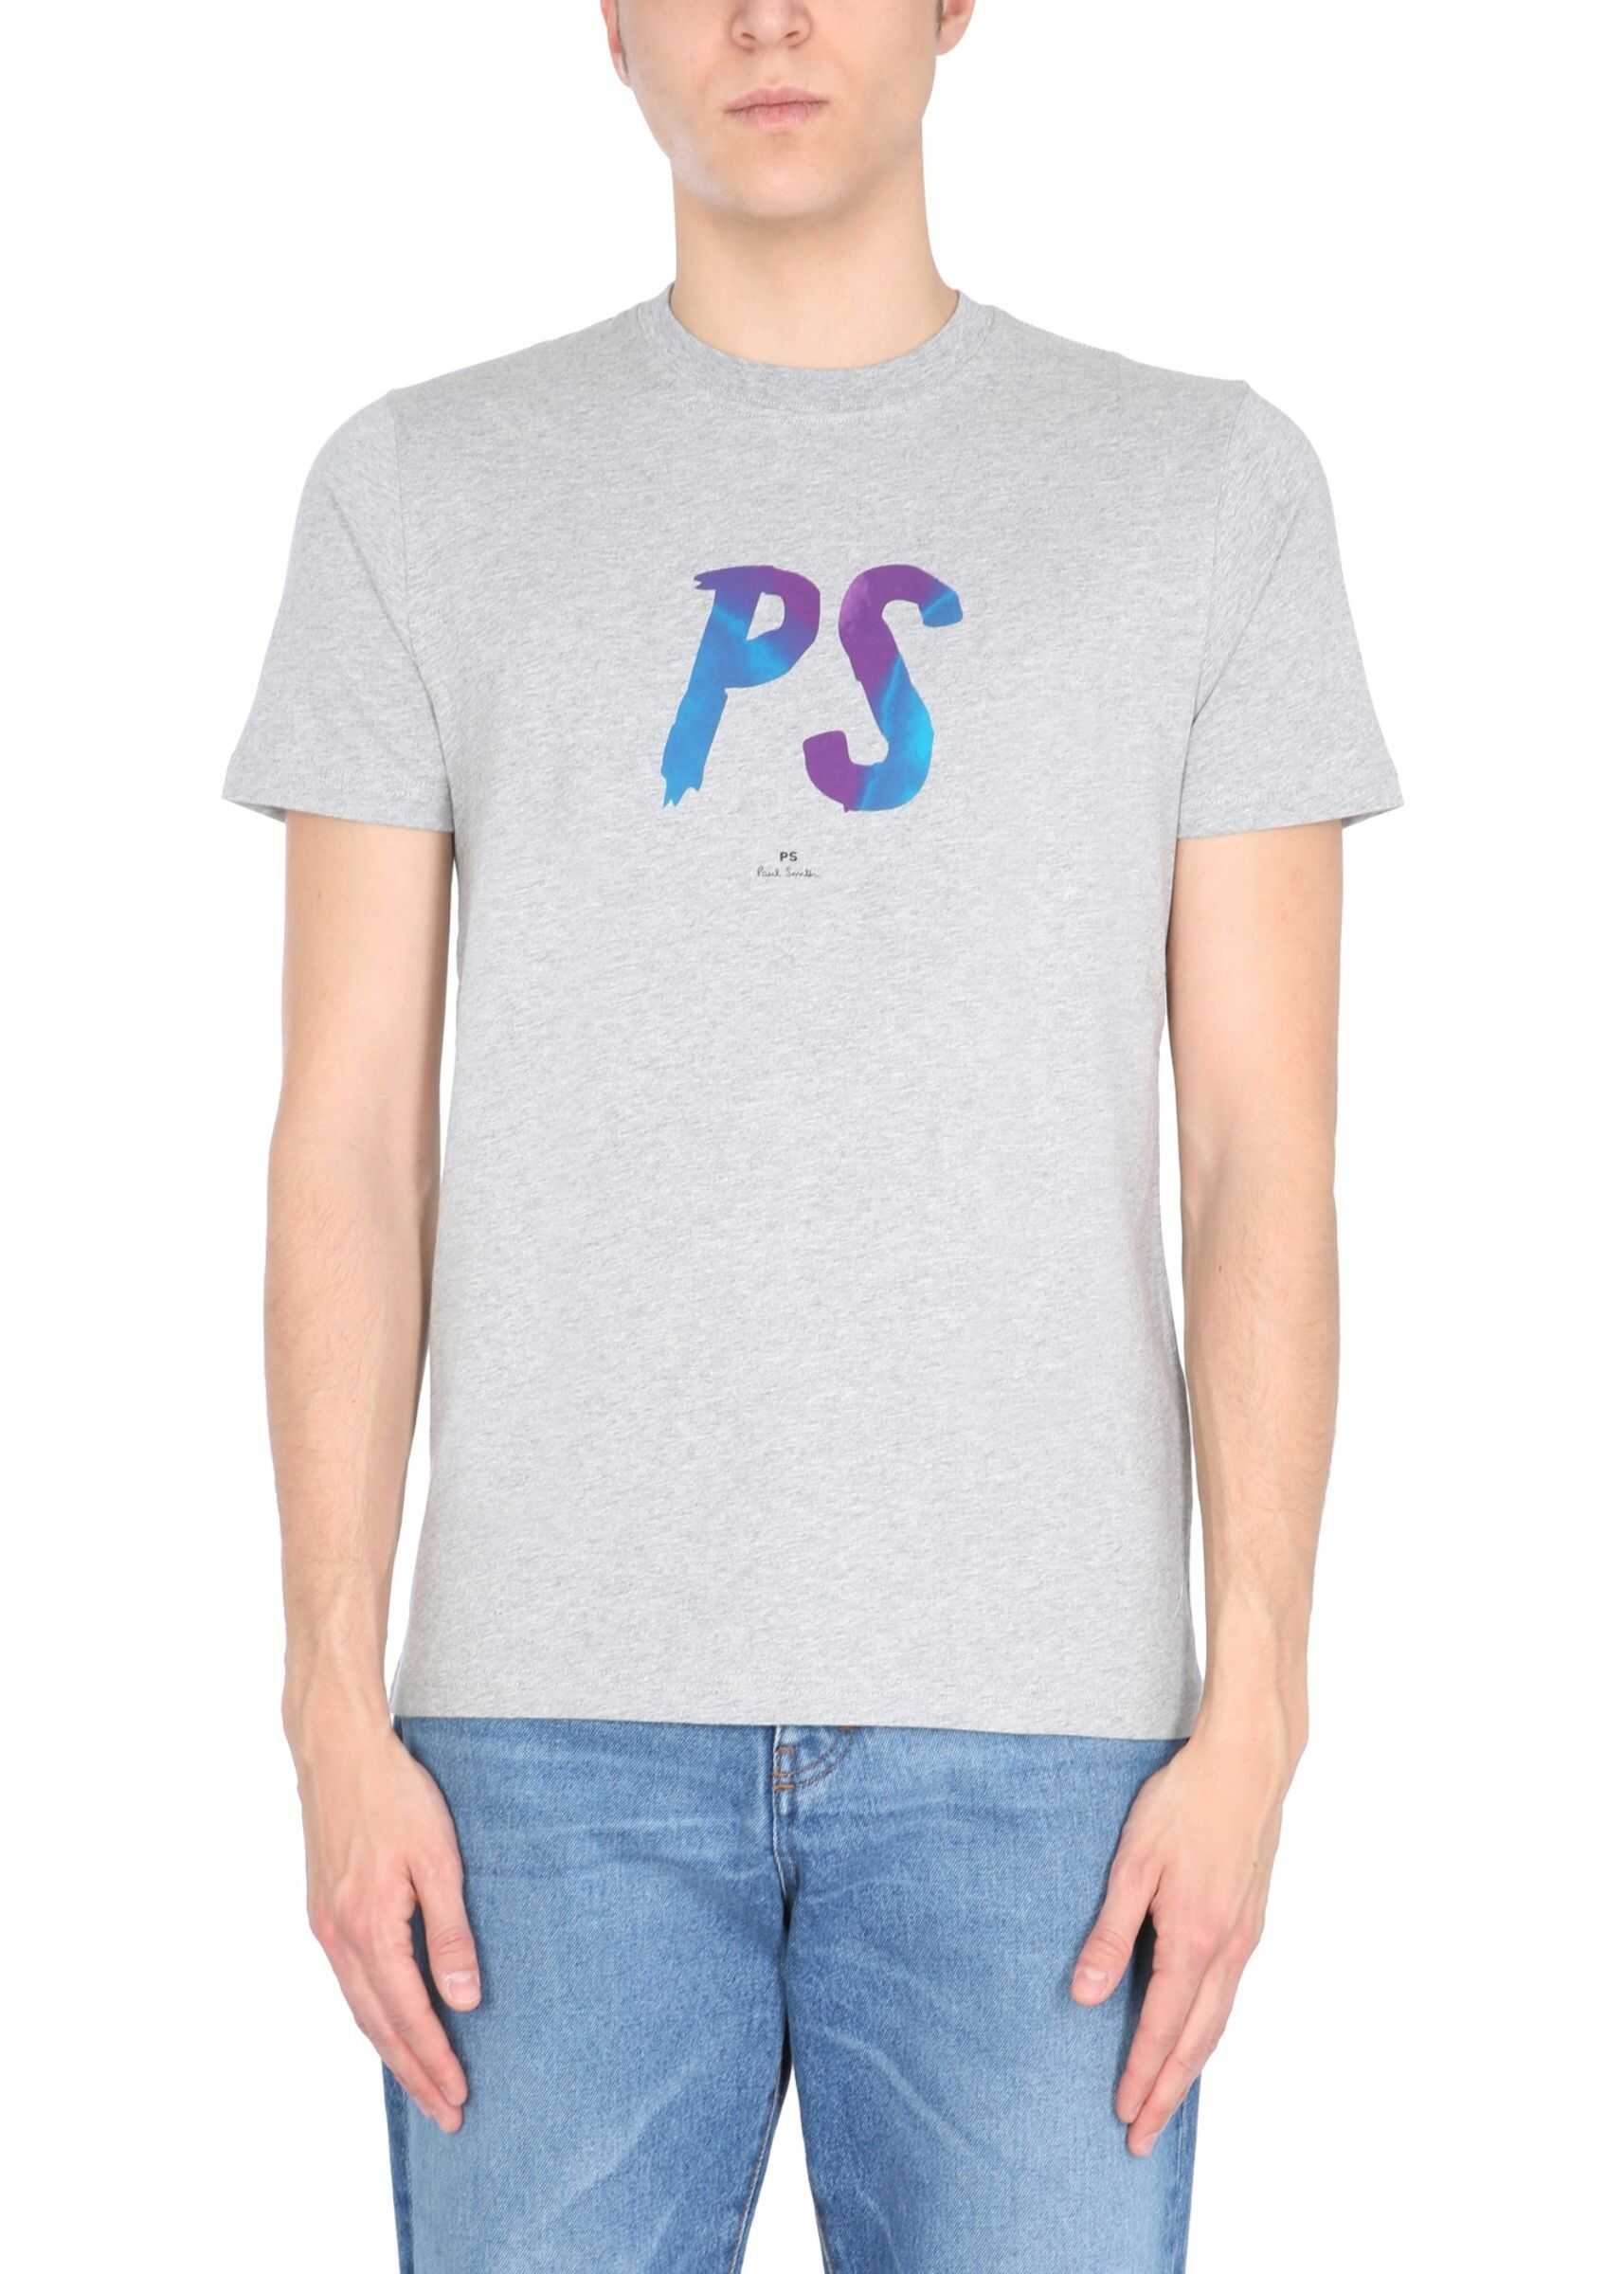 PS by Paul Smith Crew Neck T-Shirt M2R/010R/FP2619_72 GREY